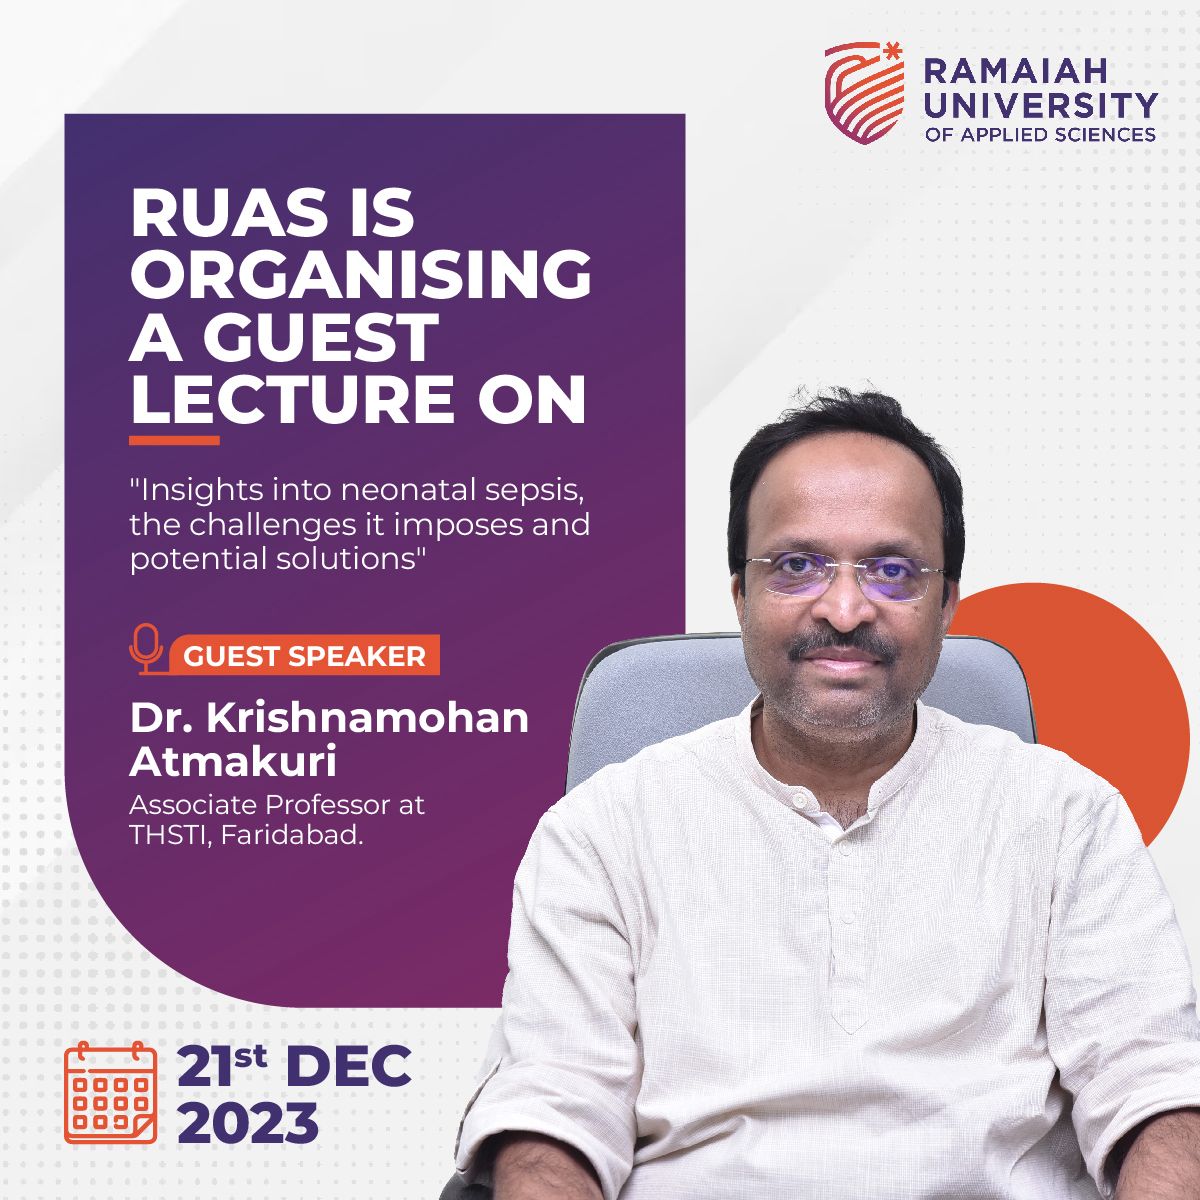 RUAS is excited to host a guest lecture featuring Dr. Krishnamohan Atmakuri, Assoc. Prof. at THSTI, Faridabad.

Don't miss this chance to gain valuable insights into neonatal sepsis and explore the potential for a healthier future for newborns.

#RUAS #NeonatalSepsis